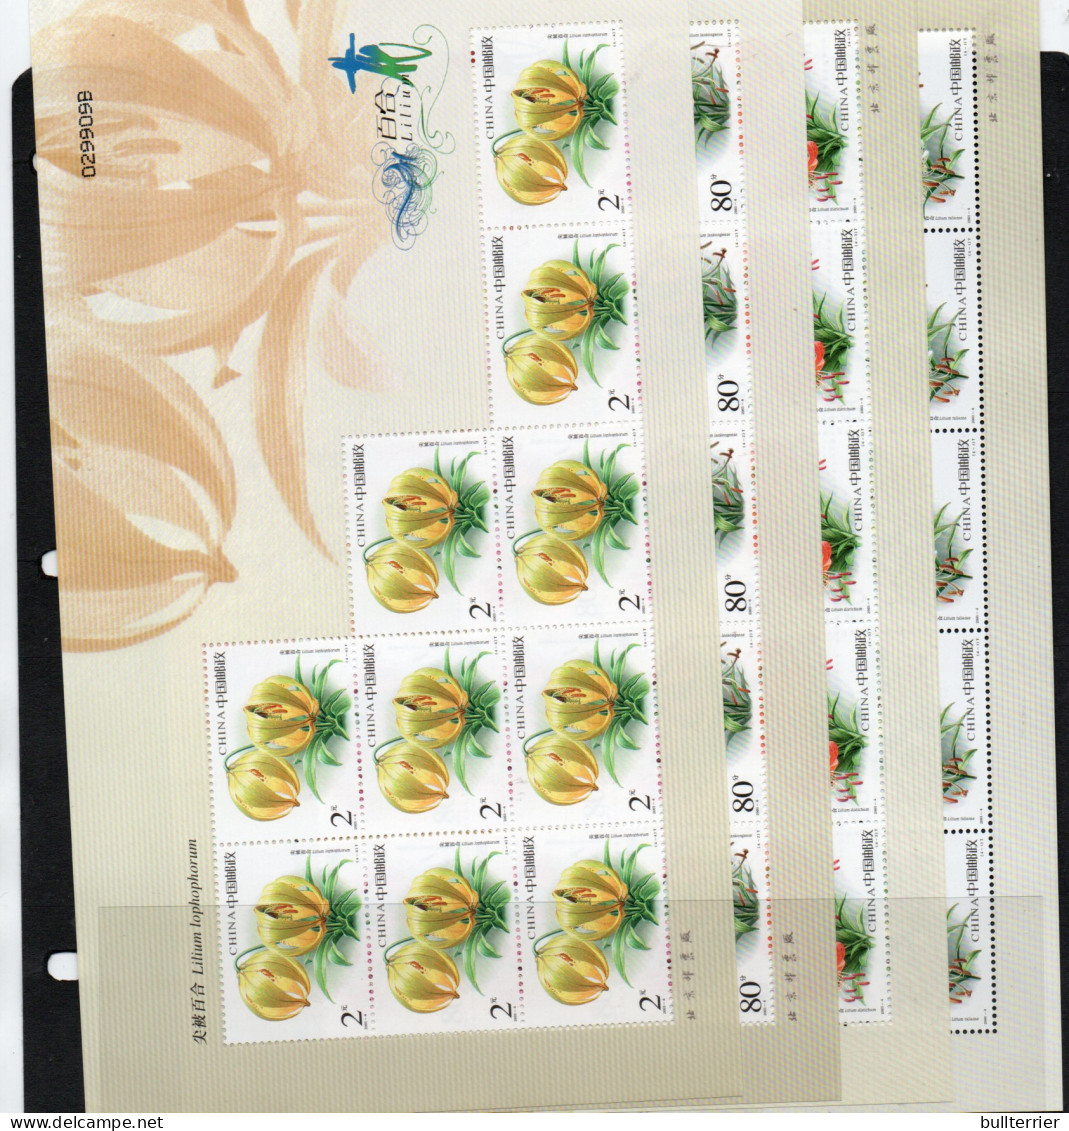 CHINA- 2002 - LILLIES SET OF 4 X SHEETLETS OF 10 MINT NEVER HINGED - Neufs